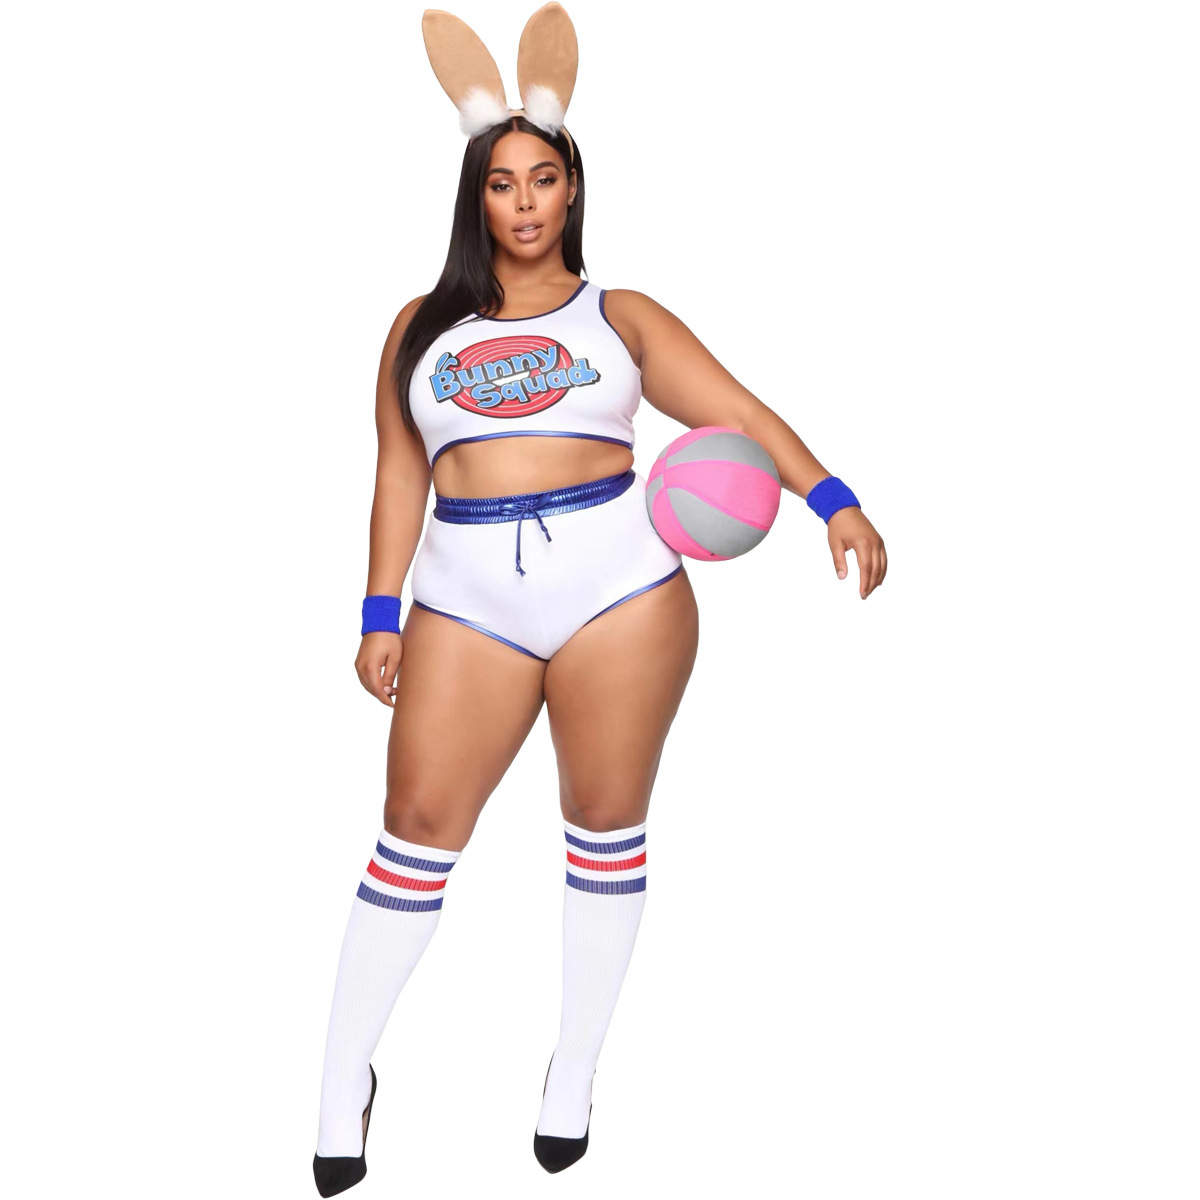 Lola Bunny Costume, Women's Halloween Top And Shorts Set Without